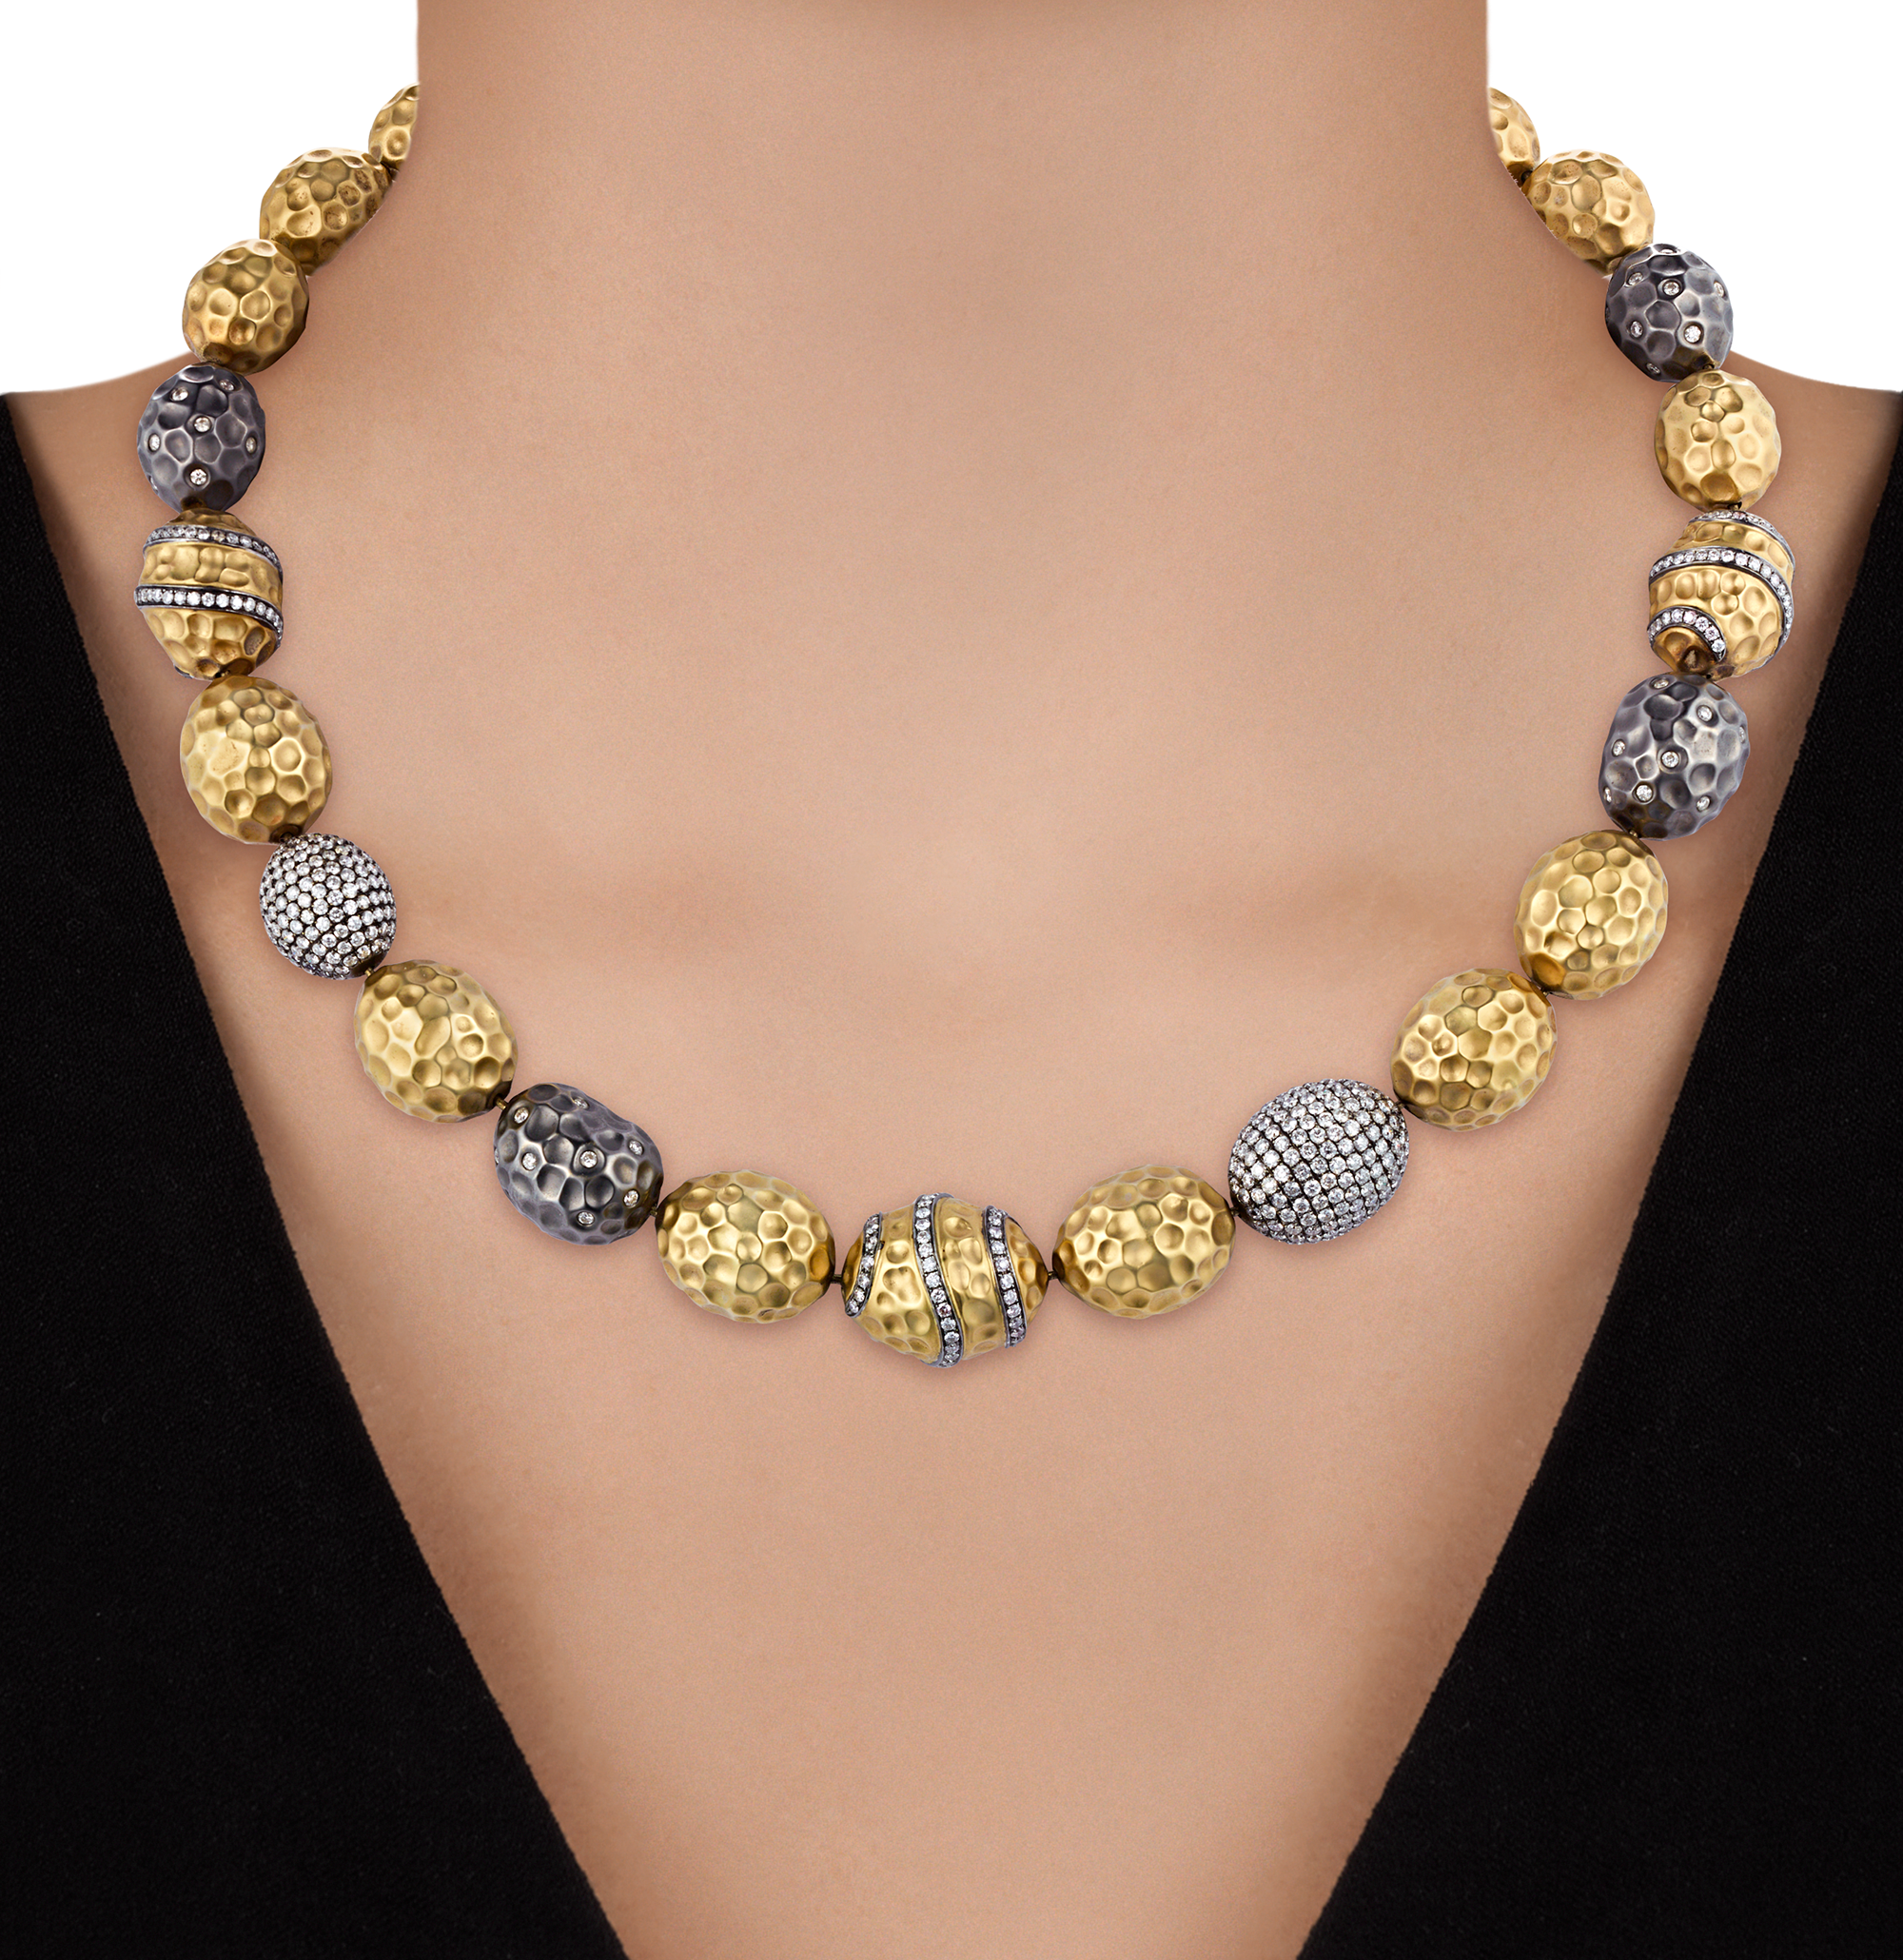 Gold and Diamond Bead Necklace, 8.80 carats